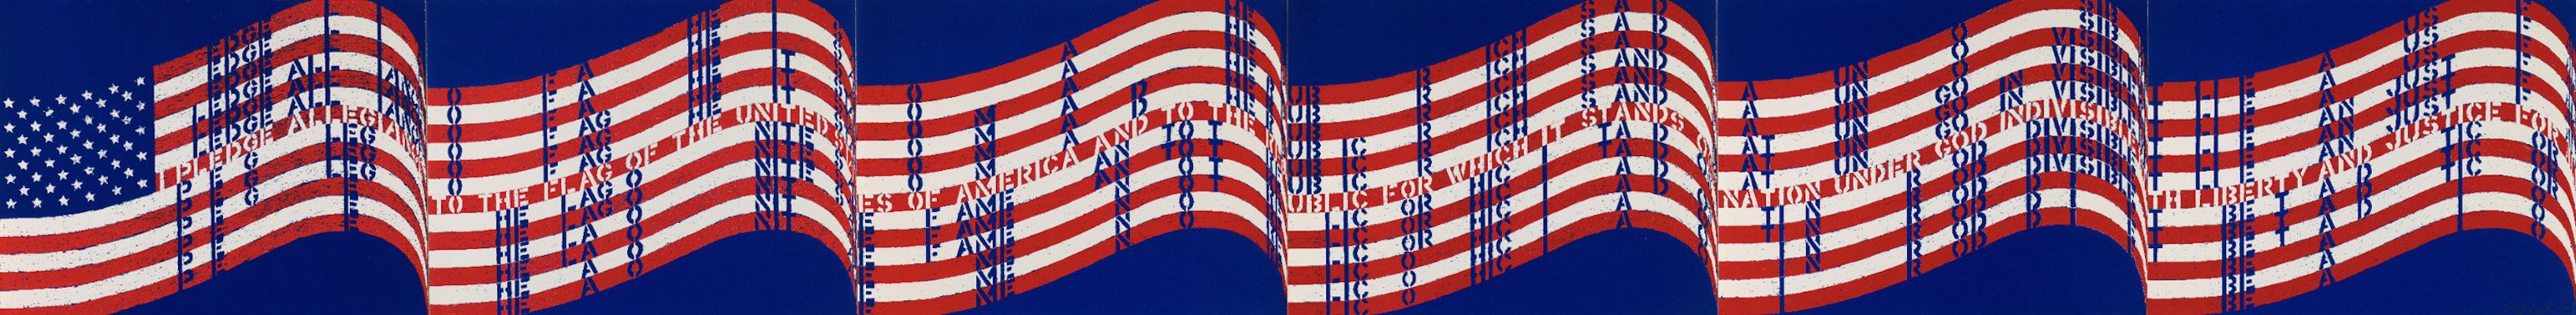 Vito Acconci, Wav(er)ing Flag, 1990, three-color lithograph on six sheets, 18 x 24 in. (each sheet), Gift of Jack Lemon and Landfall Press. Collection of the Kansas City Art Institute.